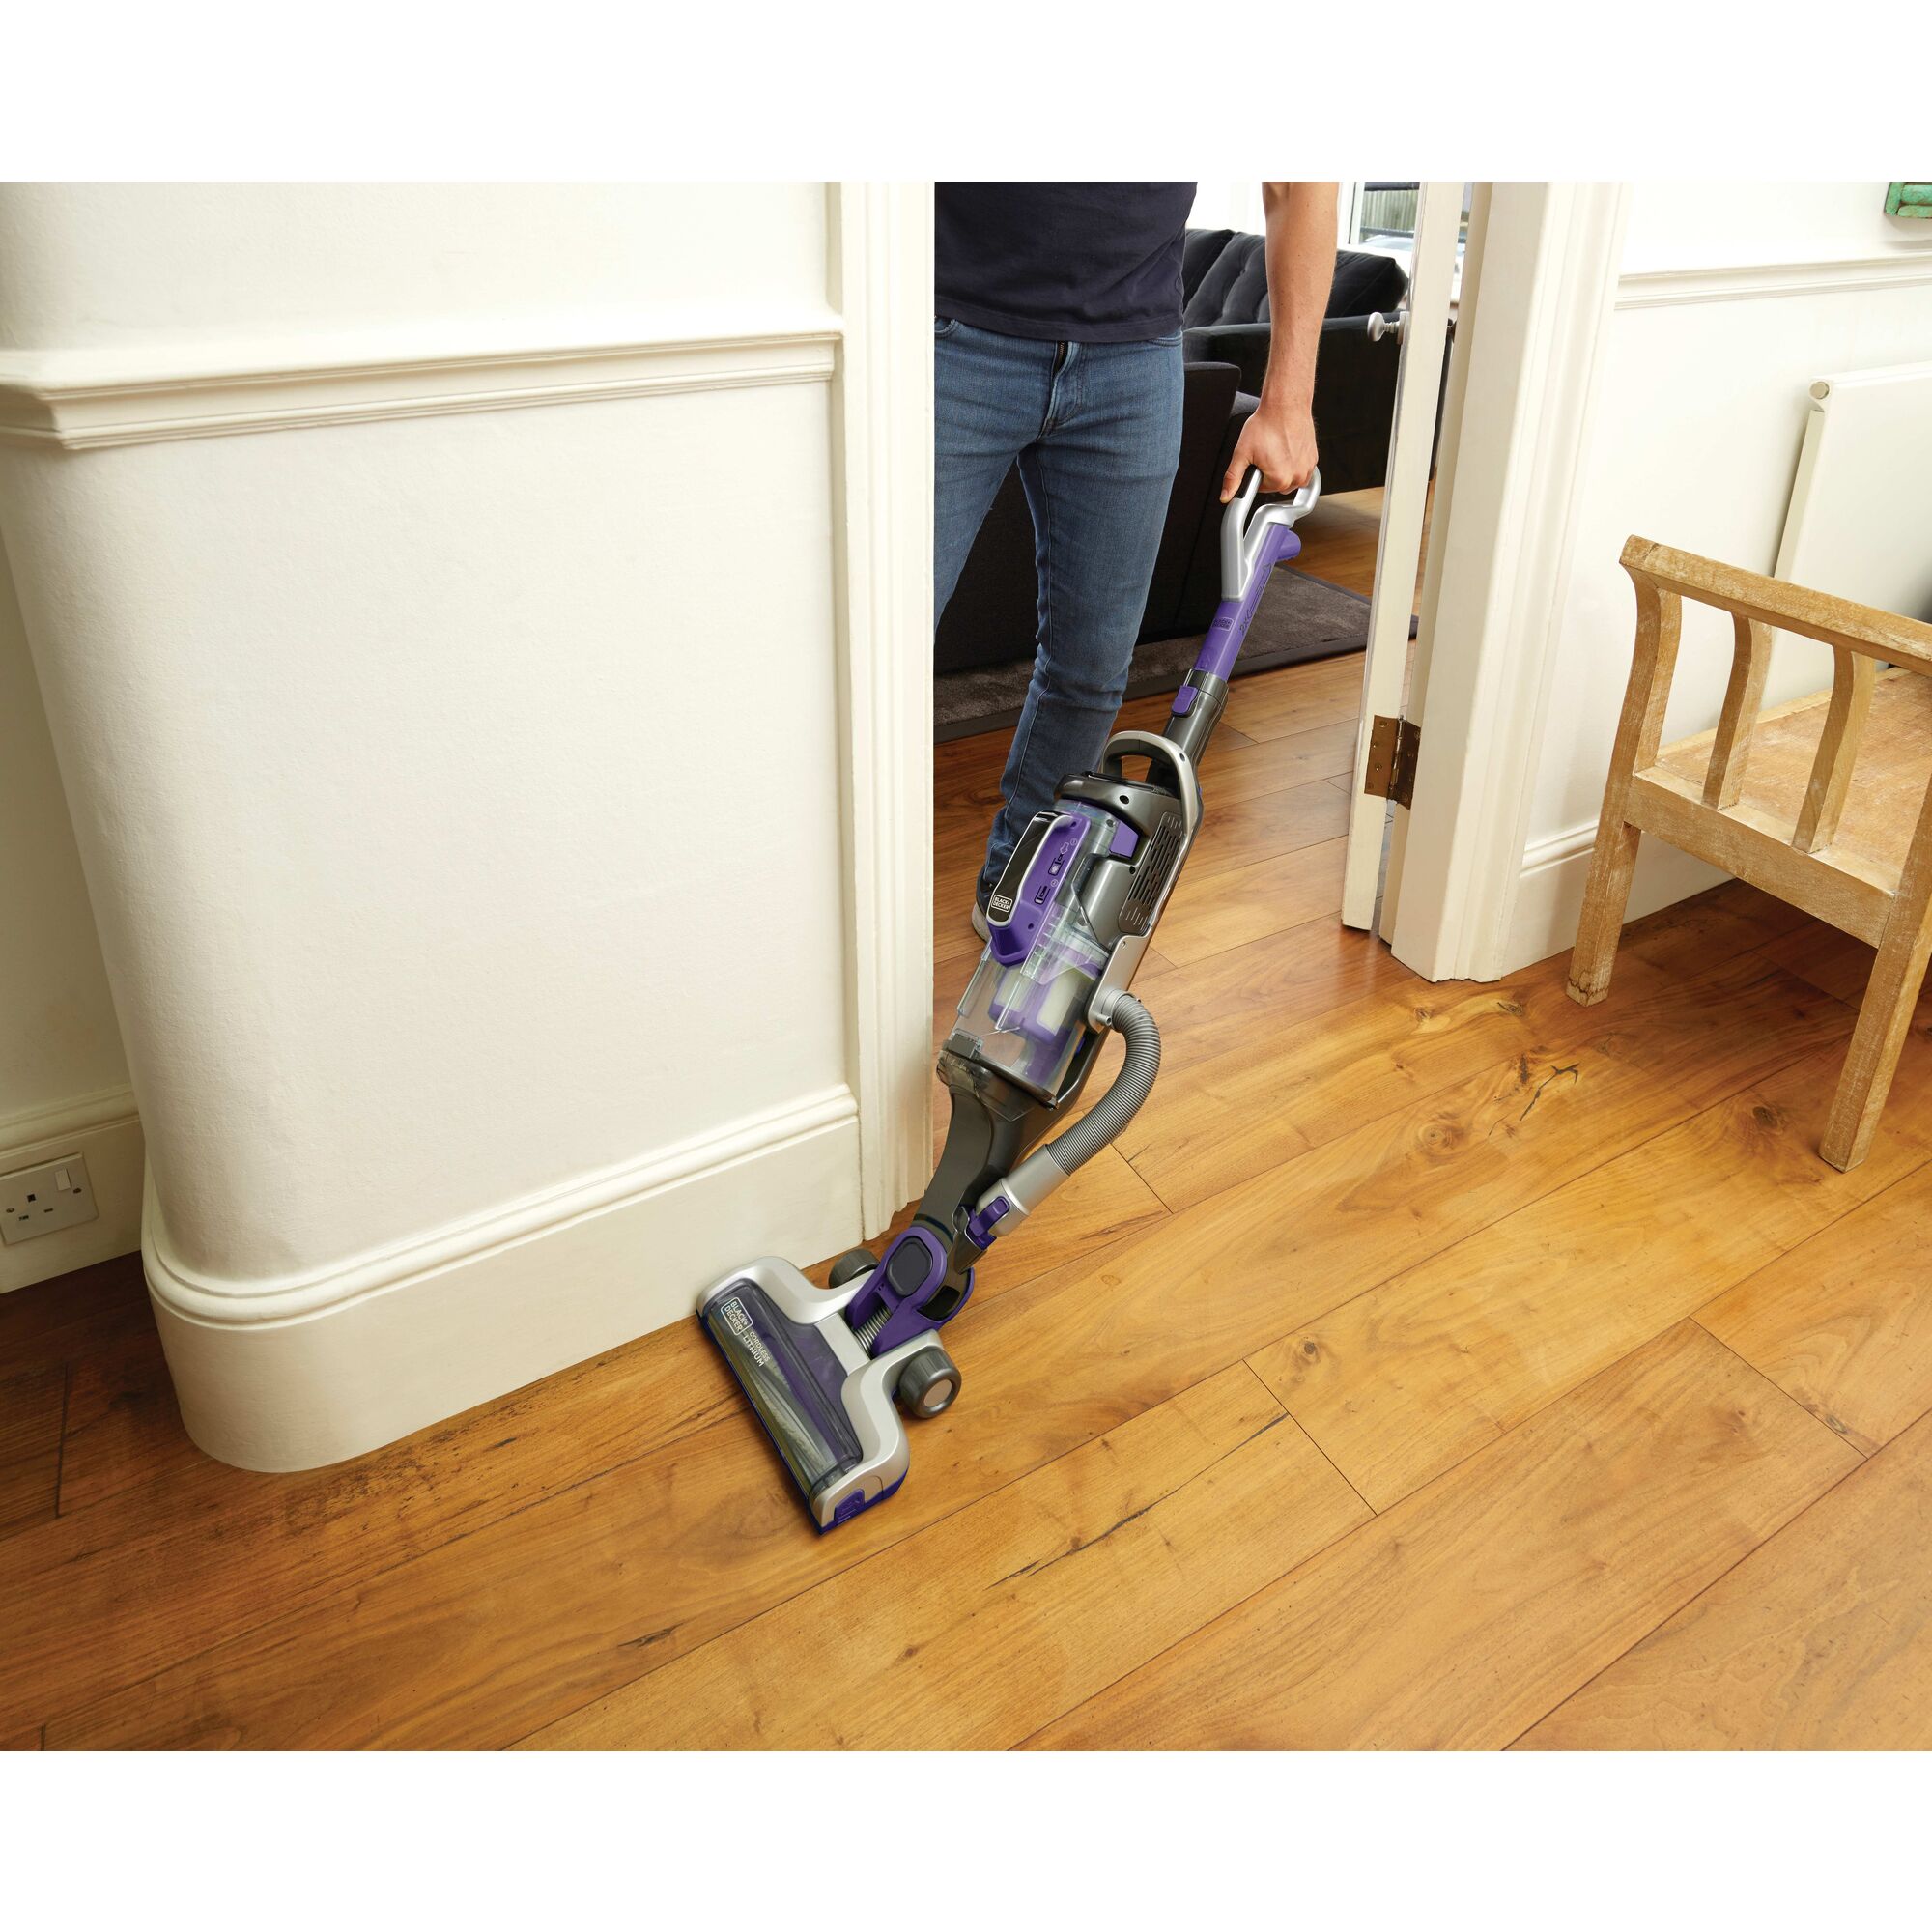 POWERSERIES PRO Cordless 2 in 1 Pet Vacuum being used to clean floor by a person.